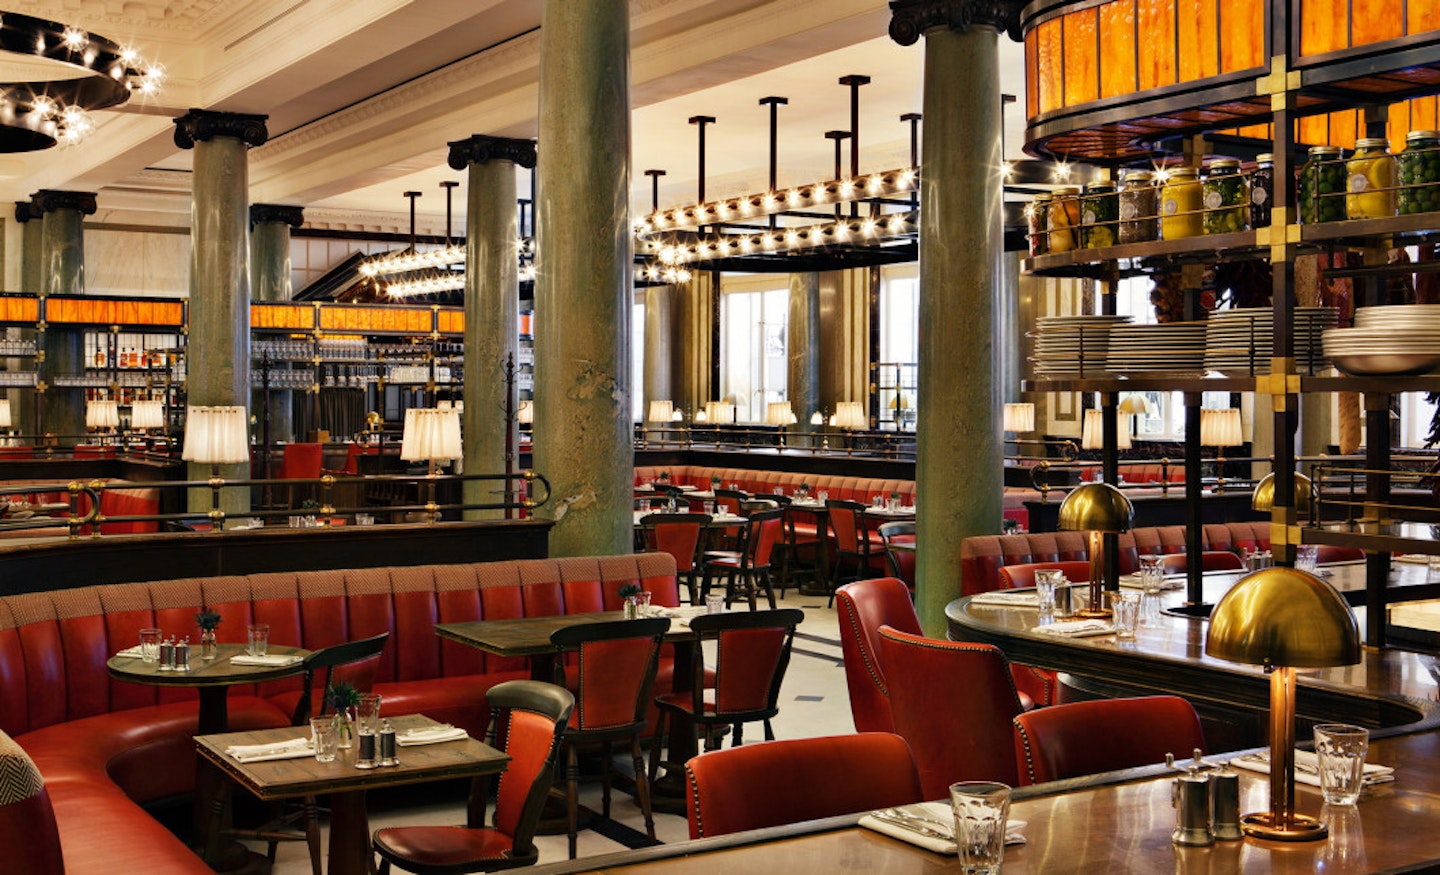 The Holborn Dining Room is a fun and bustling brasserie serving simple, delicious British fare